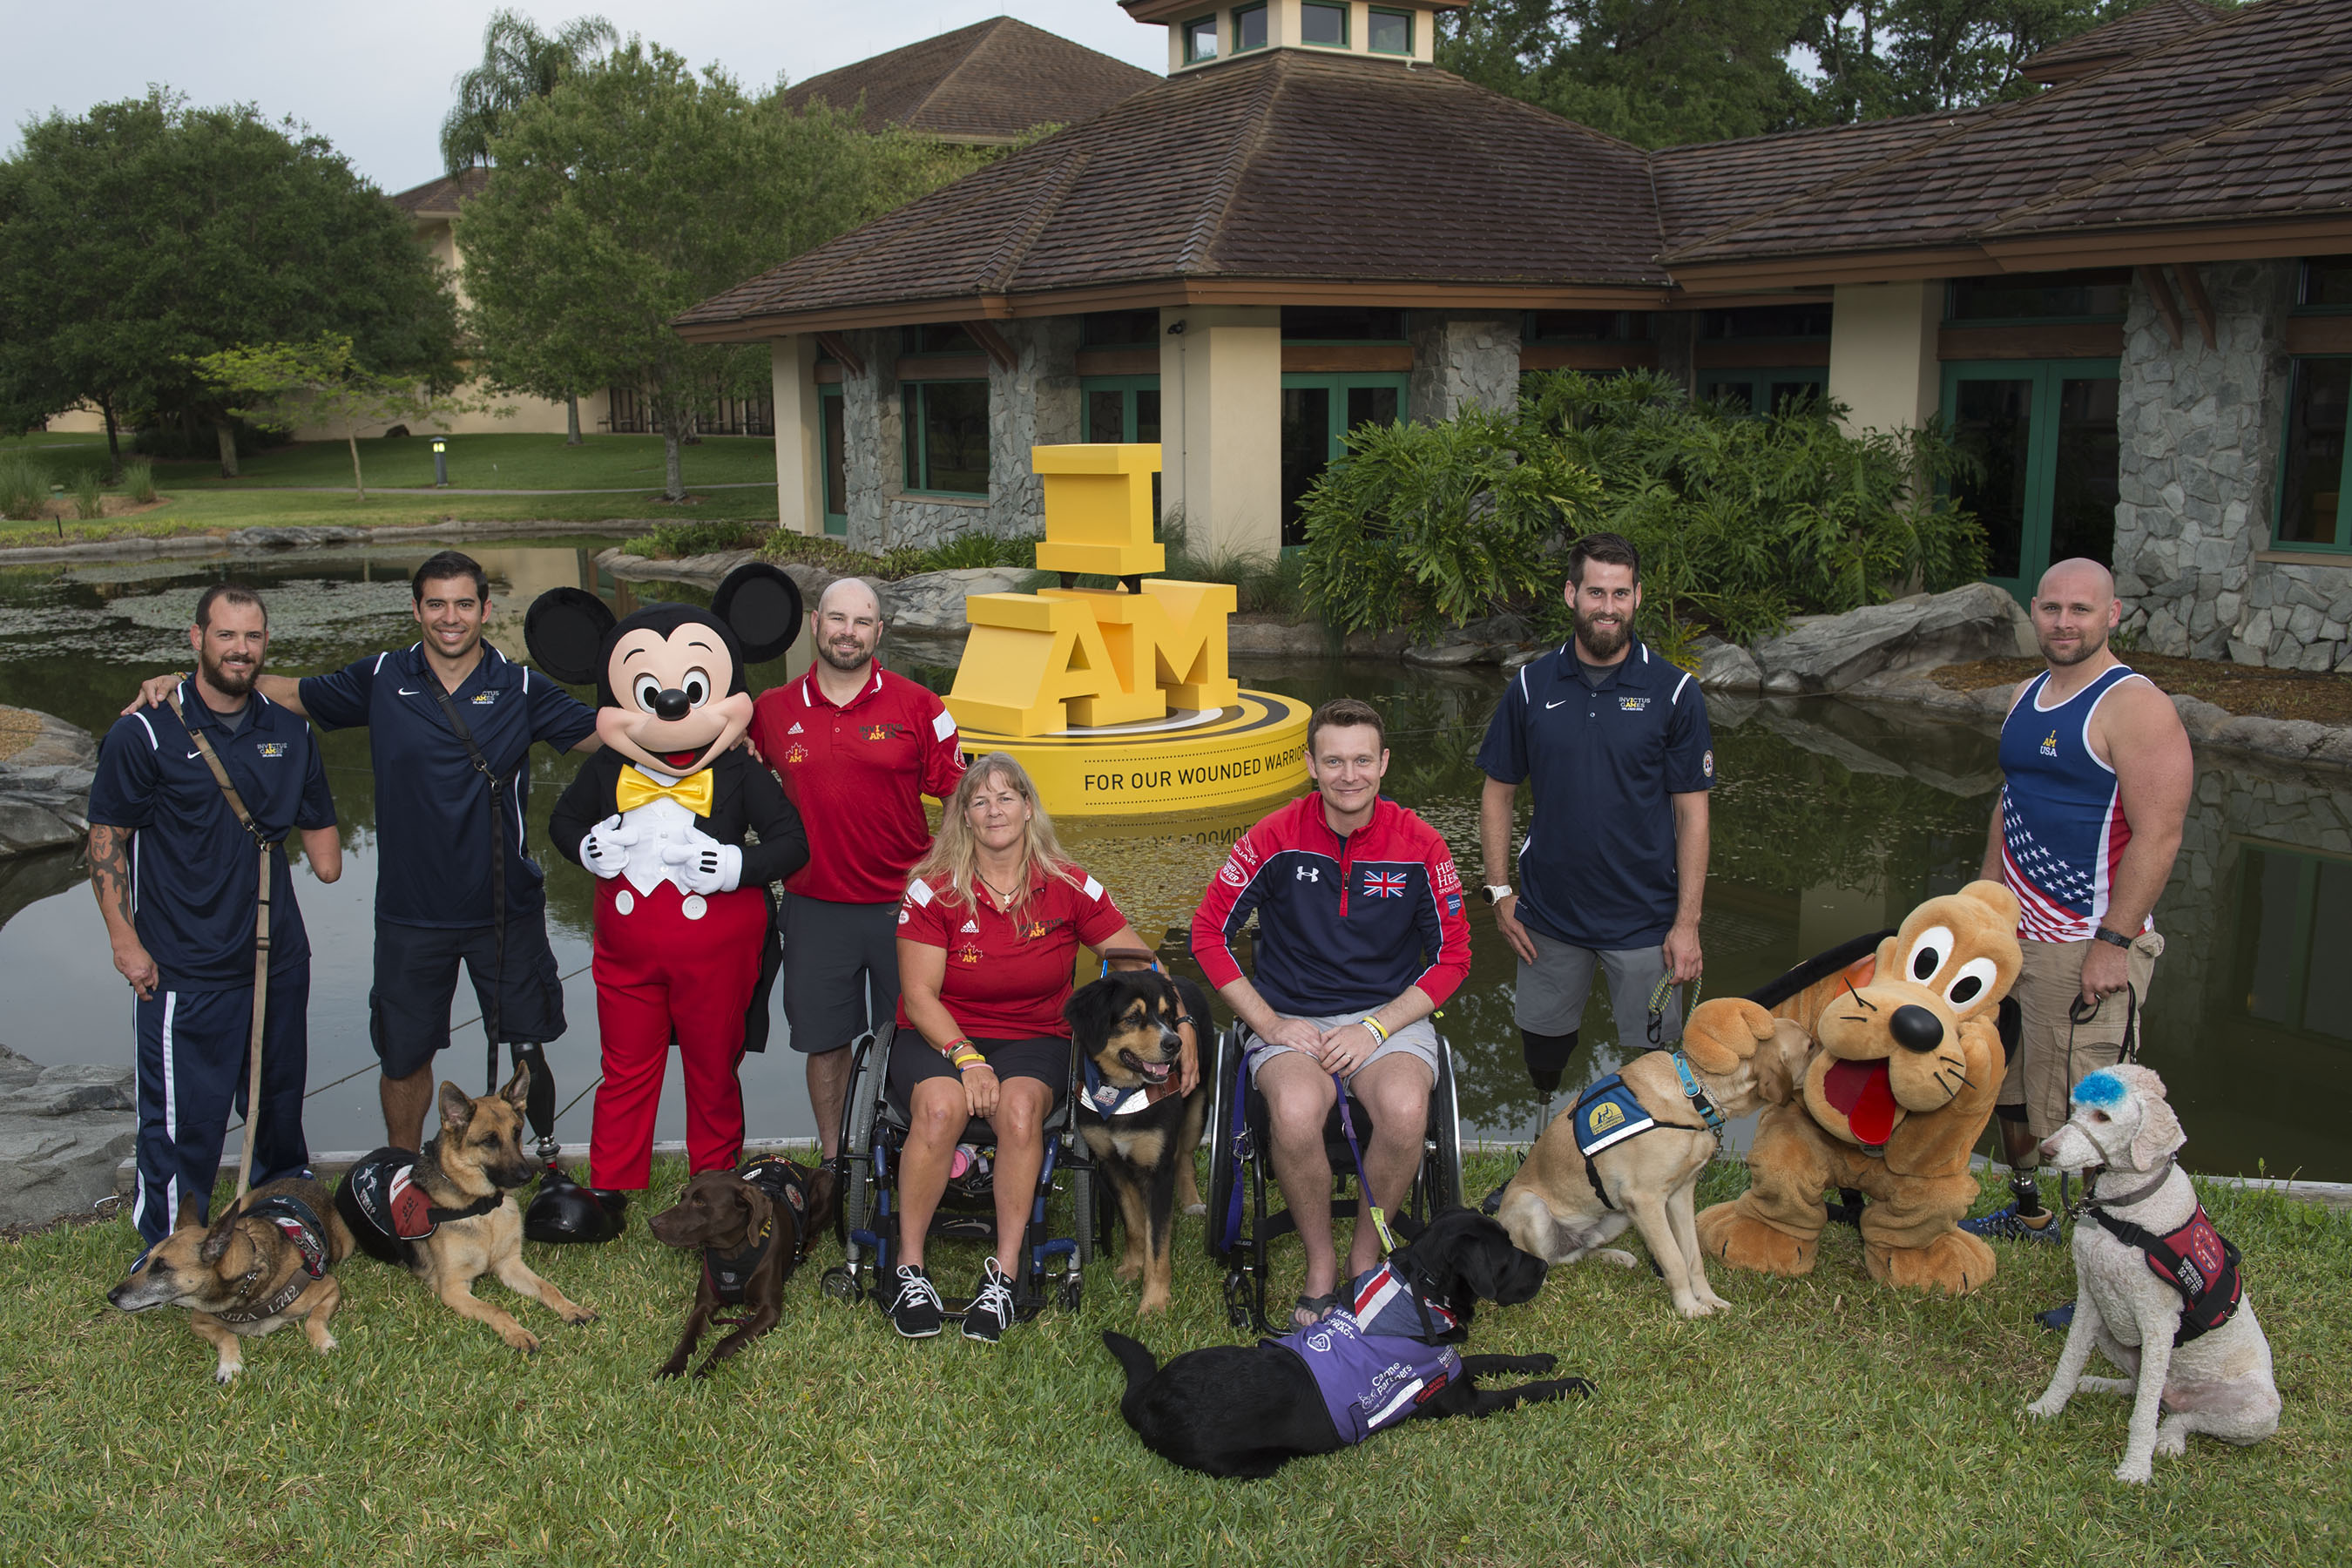 Service Dogs from the Invictus Games have a Good Day with Mickey Mouse & Pluto at Walt Disney World Resort